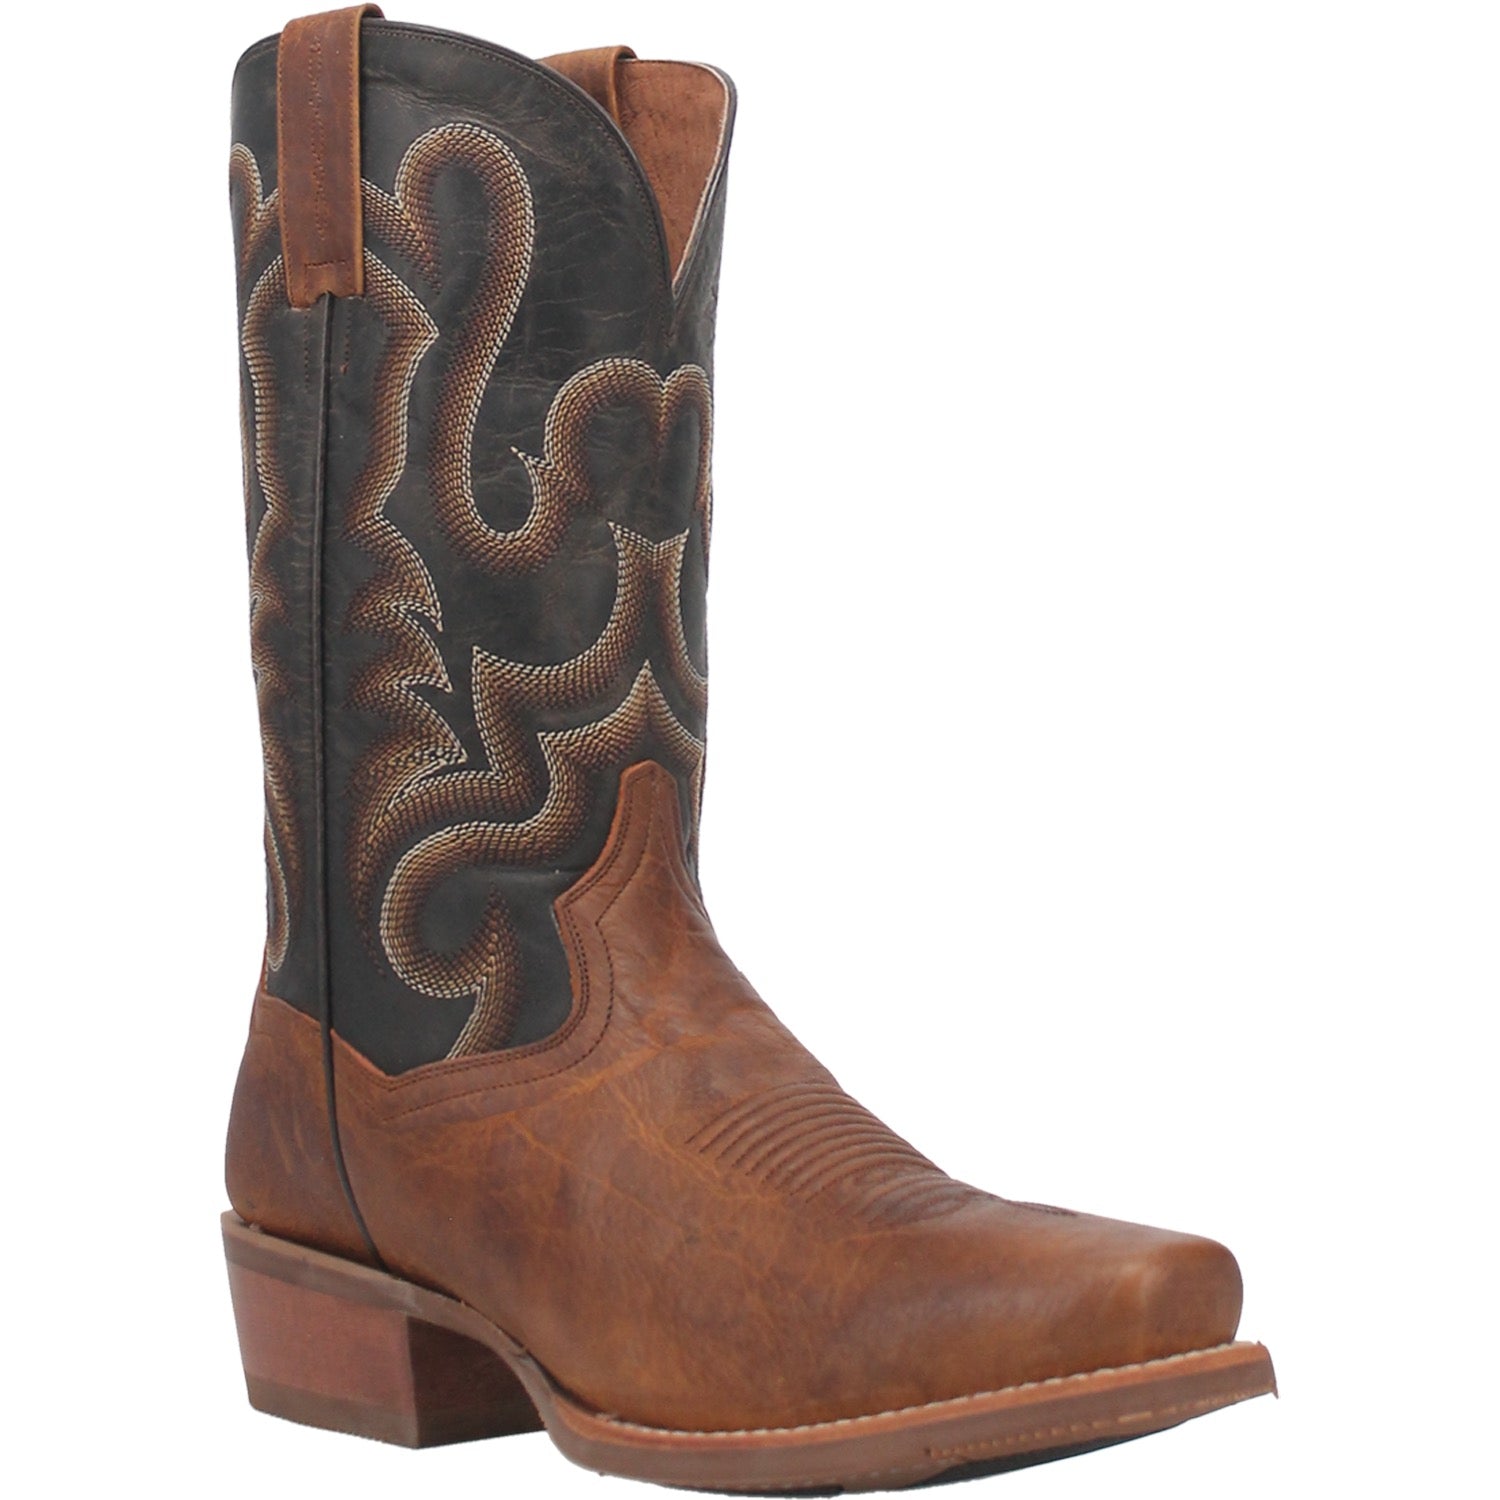 RICHLAND BISON LEATHER BOOT